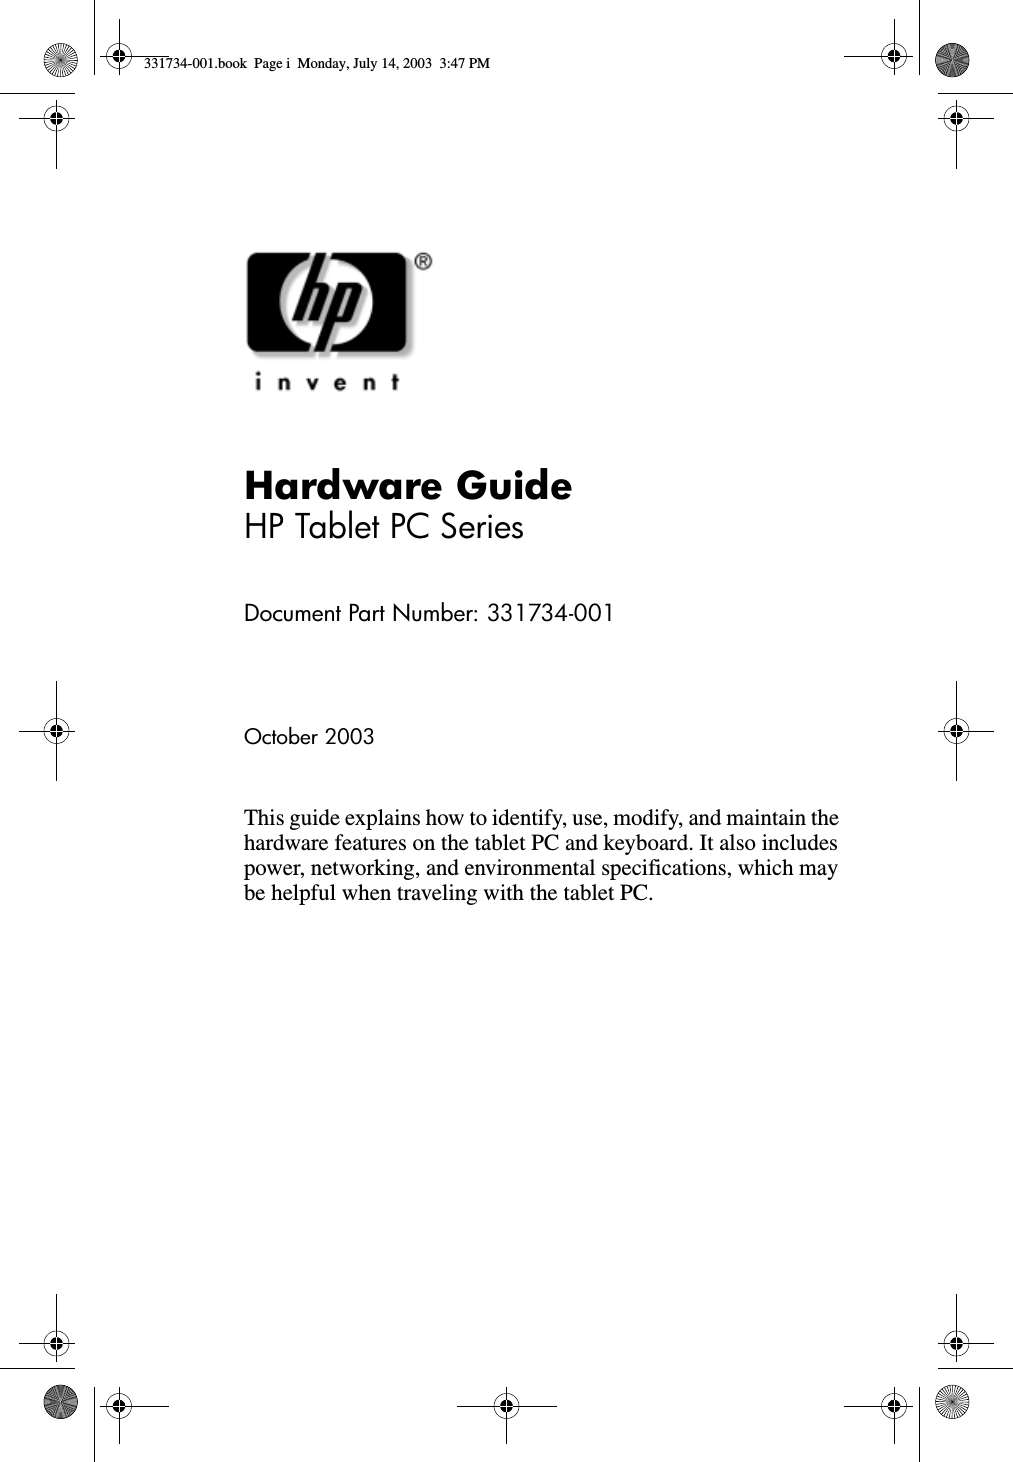 Hardware GuideHP Tablet PC SeriesDocument Part Number: 331734-001October 2003This guide explains how to identify, use, modify, and maintain the hardware features on the tablet PC and keyboard. It also includes power, networking, and environmental specifications, which may be helpful when traveling with the tablet PC.331734-001.book  Page i  Monday, July 14, 2003  3:47 PM